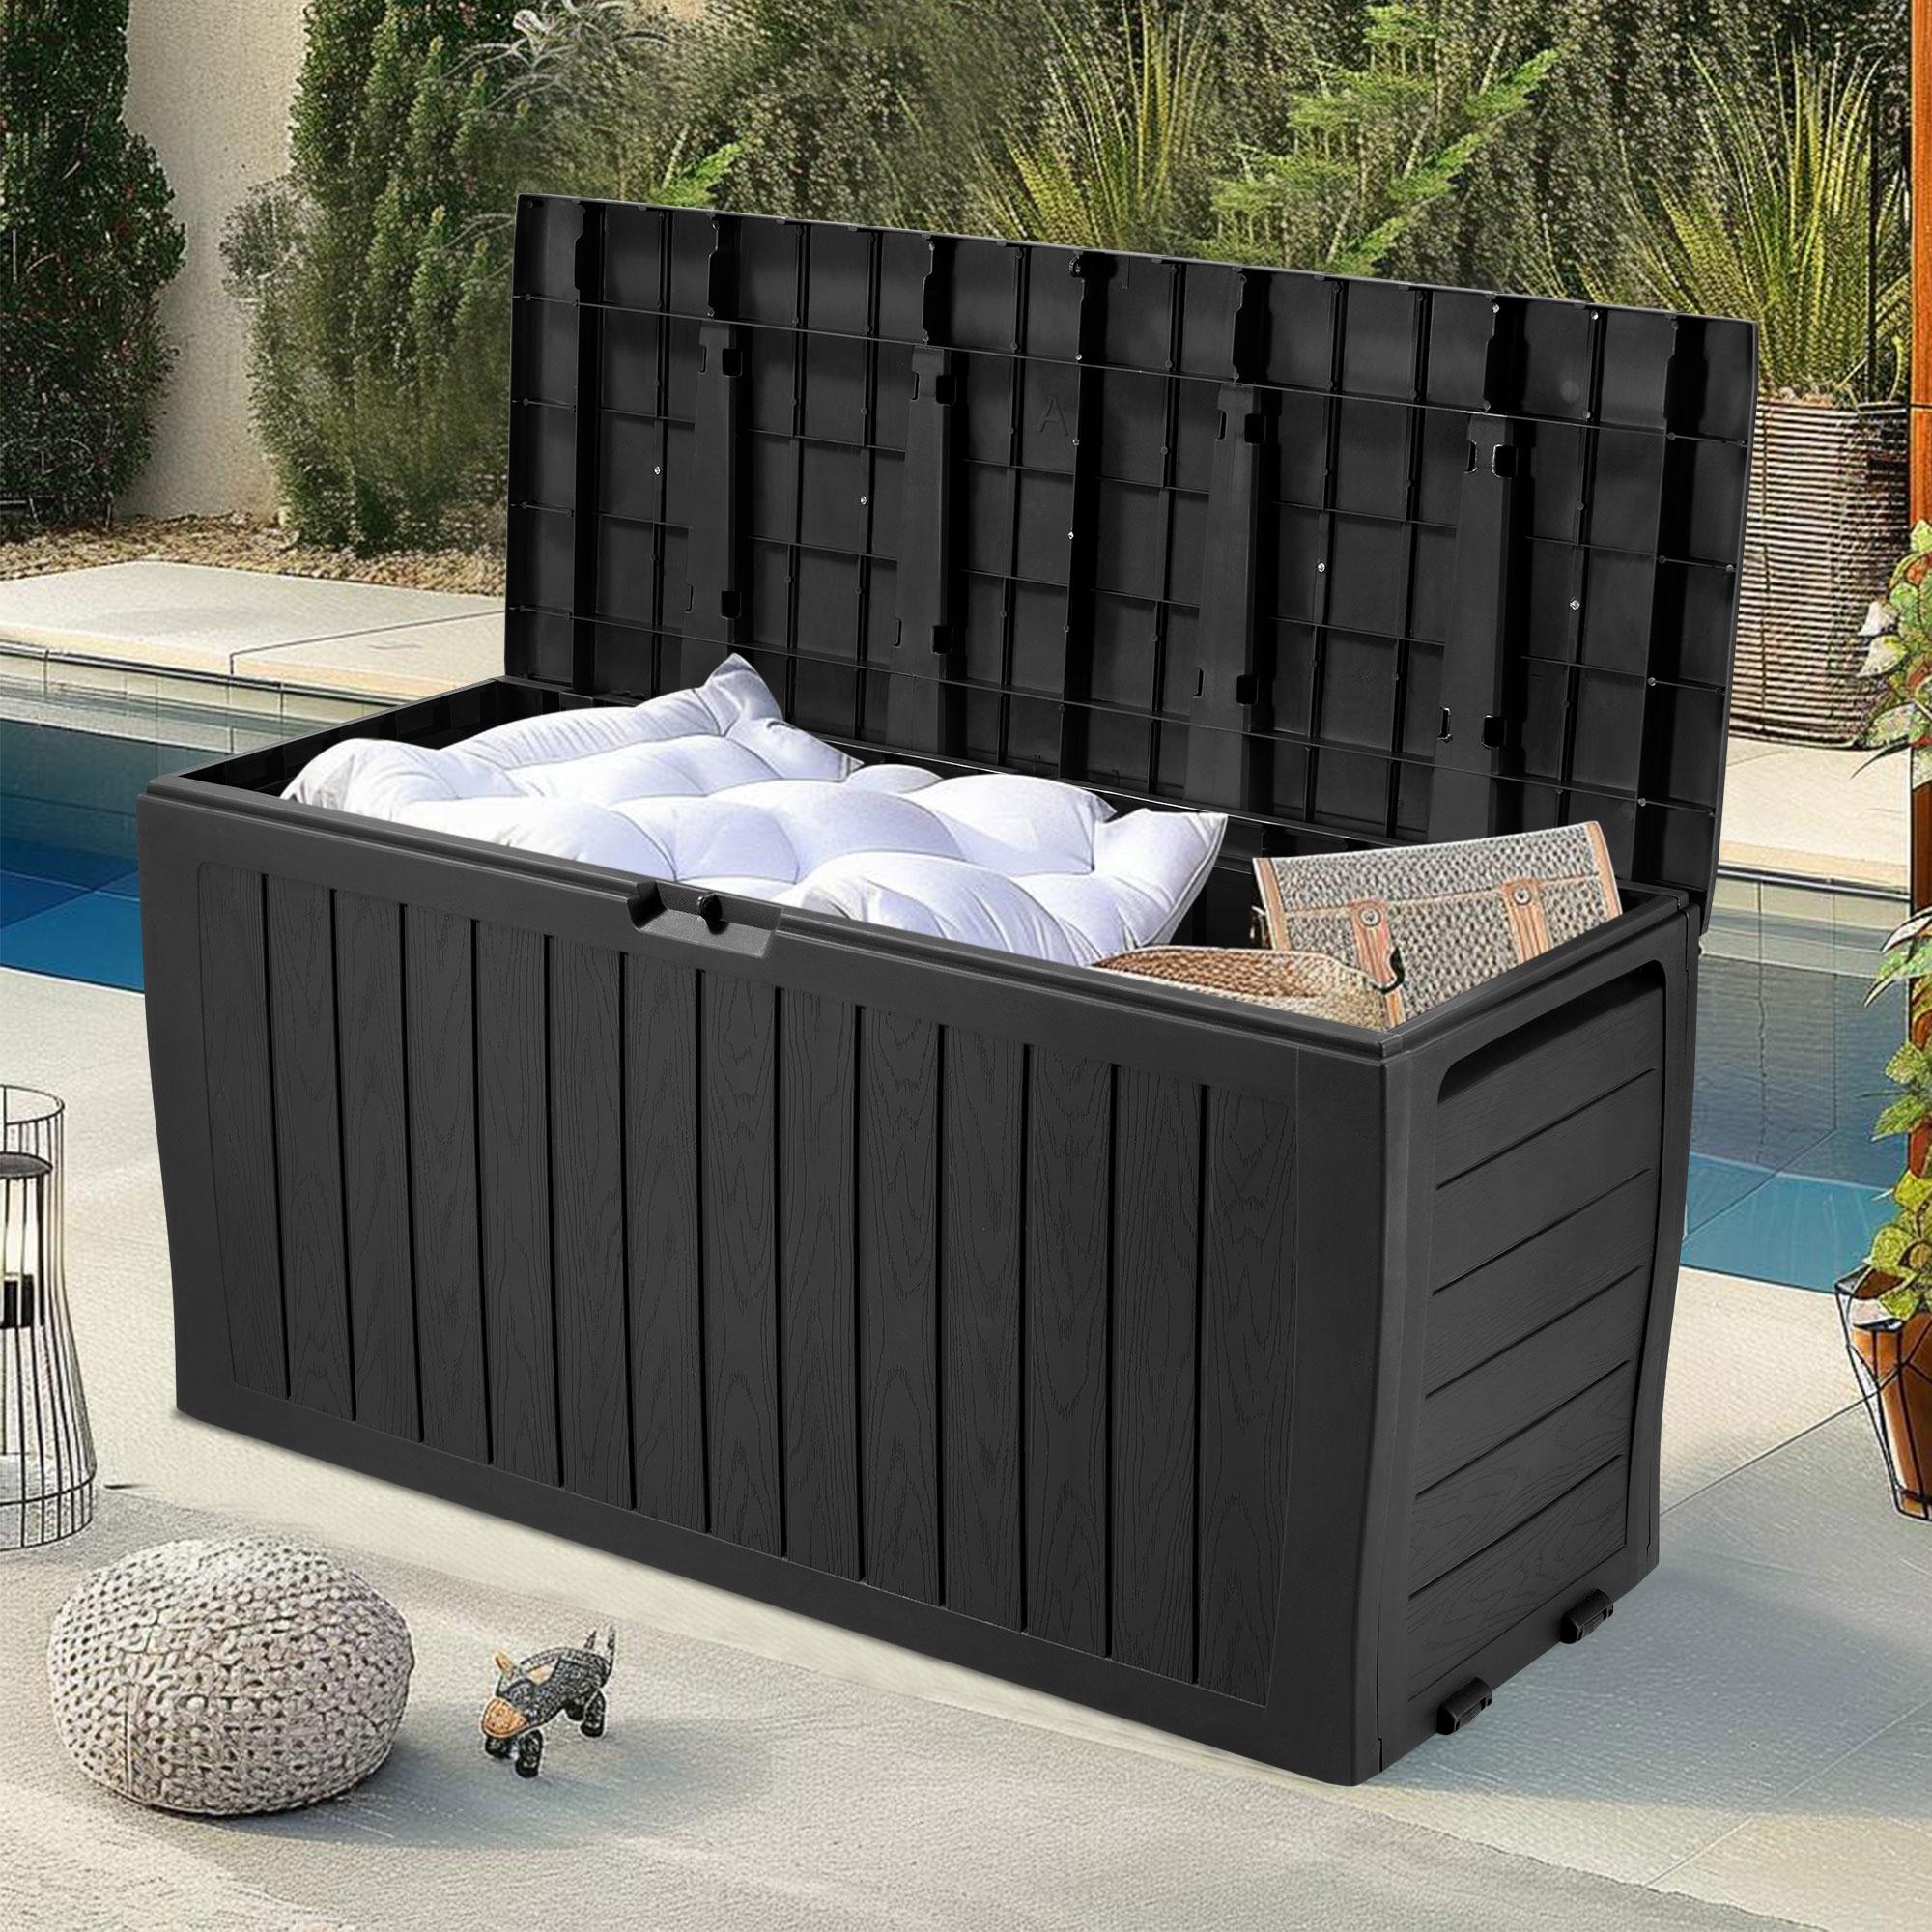 Seizeen 75 Gallon Resin Deck Box on Wheels, Patio Large Storage Cabinet, Outdoor Waterproof Storage Chest, Storage Container for Outside Furniture Cushions, Garden Tools, Kids' Toys, Black, D7226 - image 2 of 11